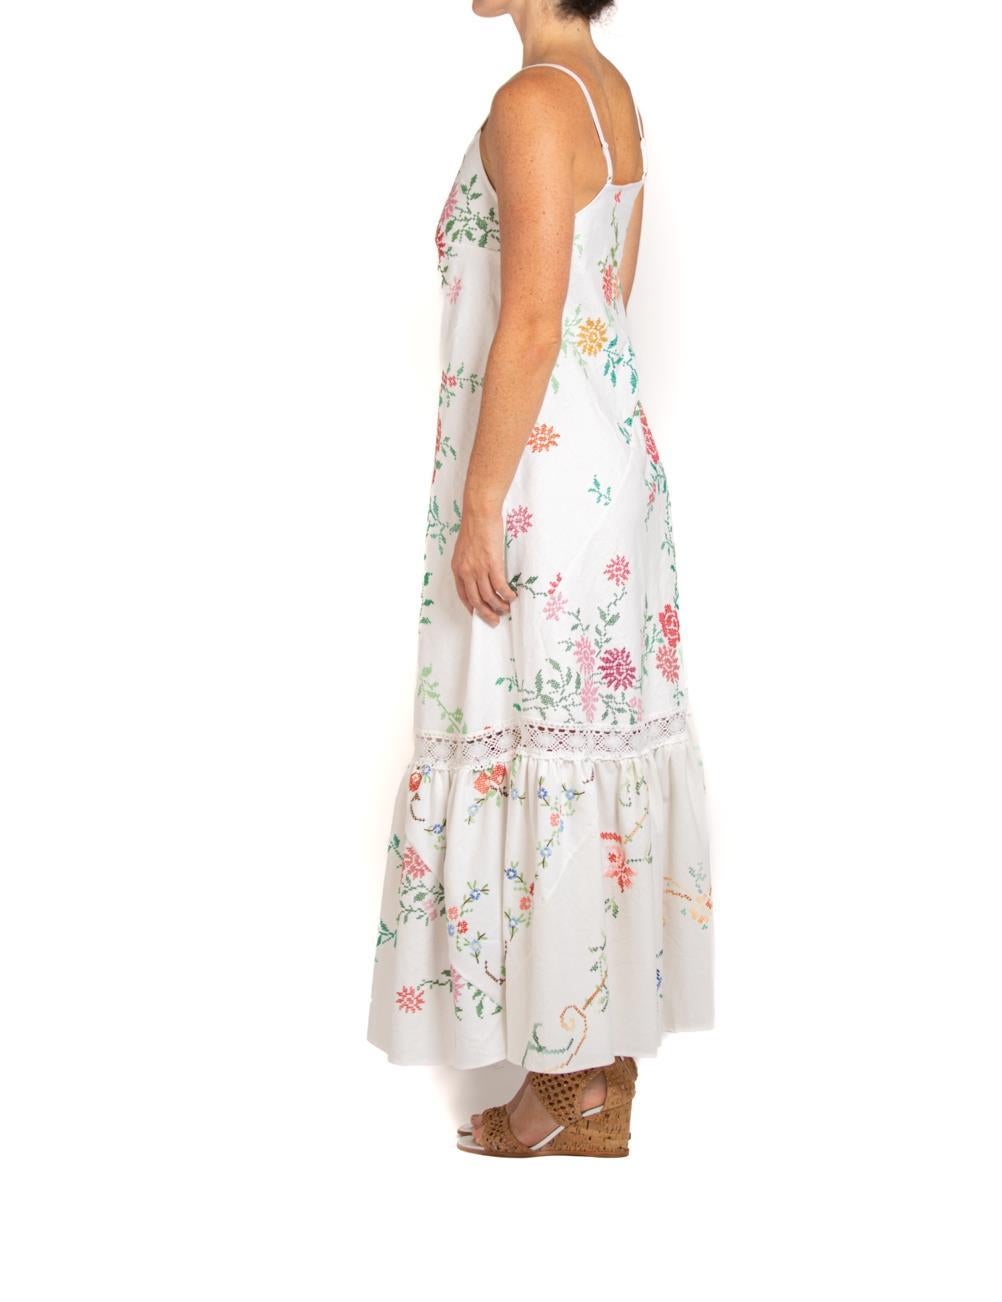 Women's MORPHEW COLLECTION White & Floral Hand Embroidered Fabric From France Dress For Sale